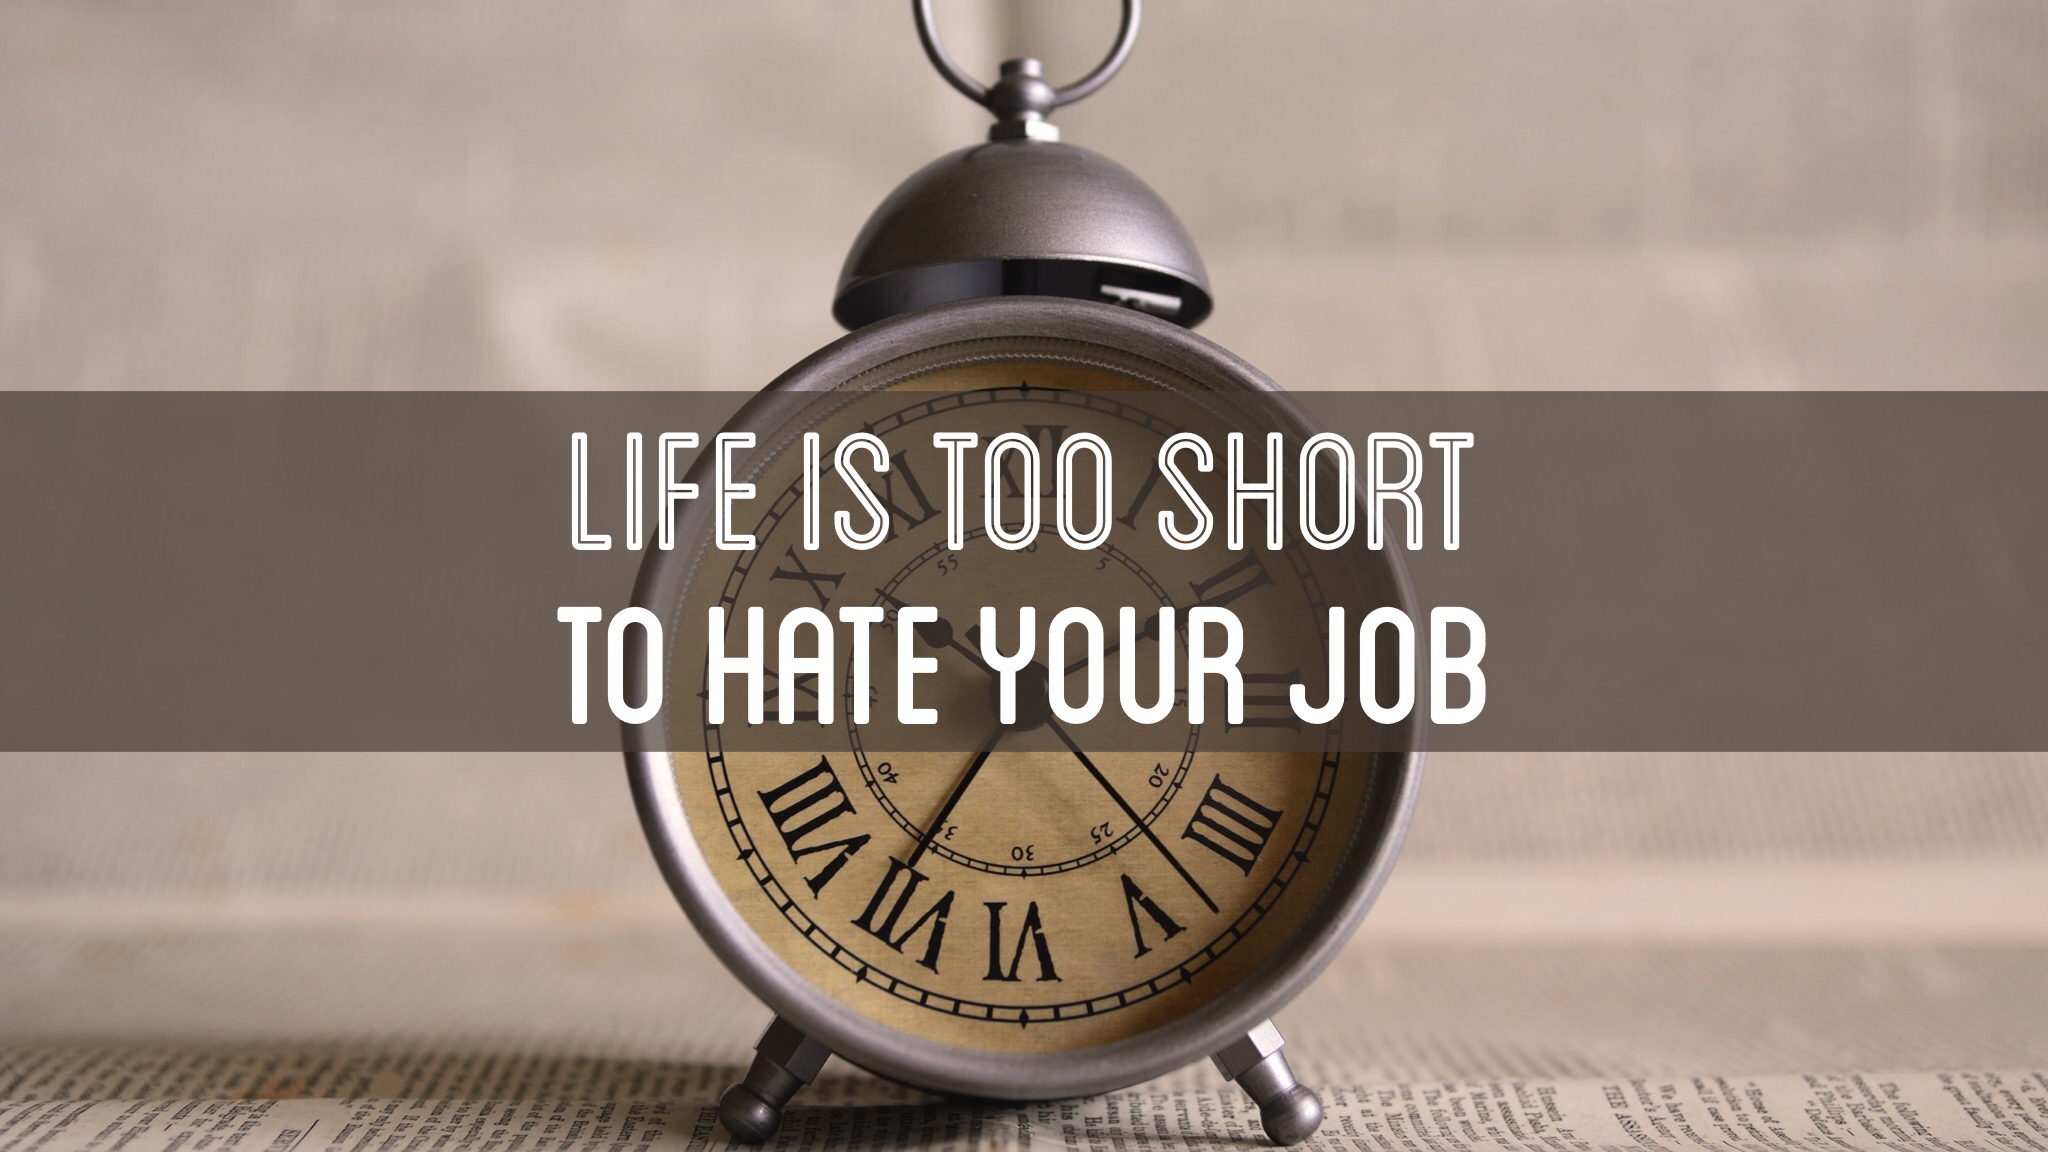 Life Is Too Short To Hate Your Job - HD Wallpaper 